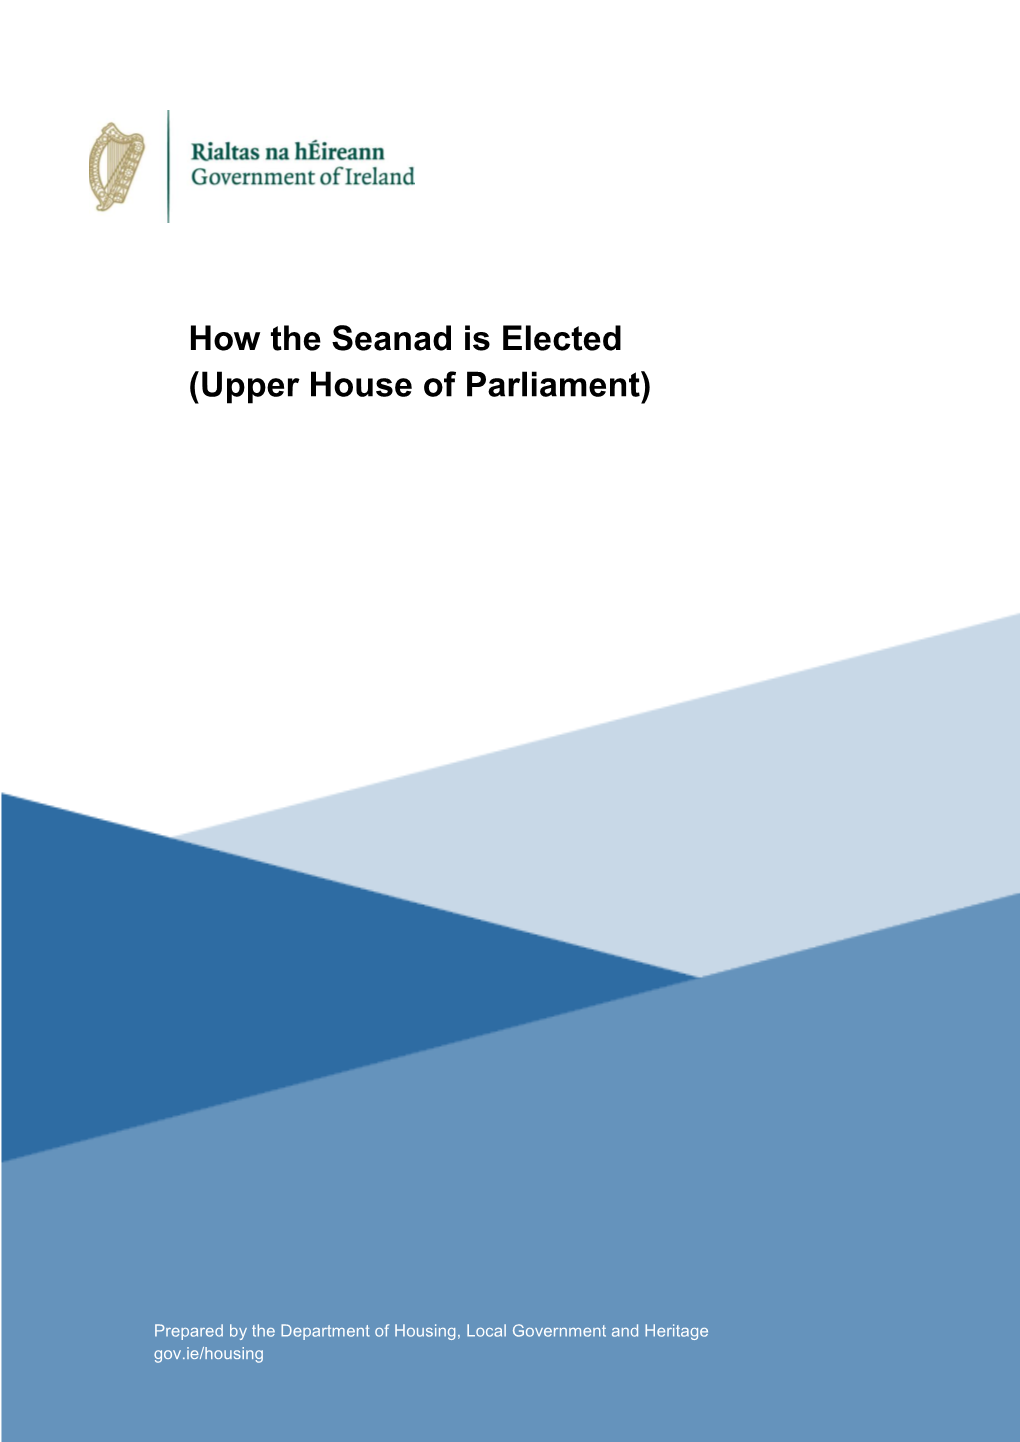 How the Seanad Is Elected (Upper House of Parliament)